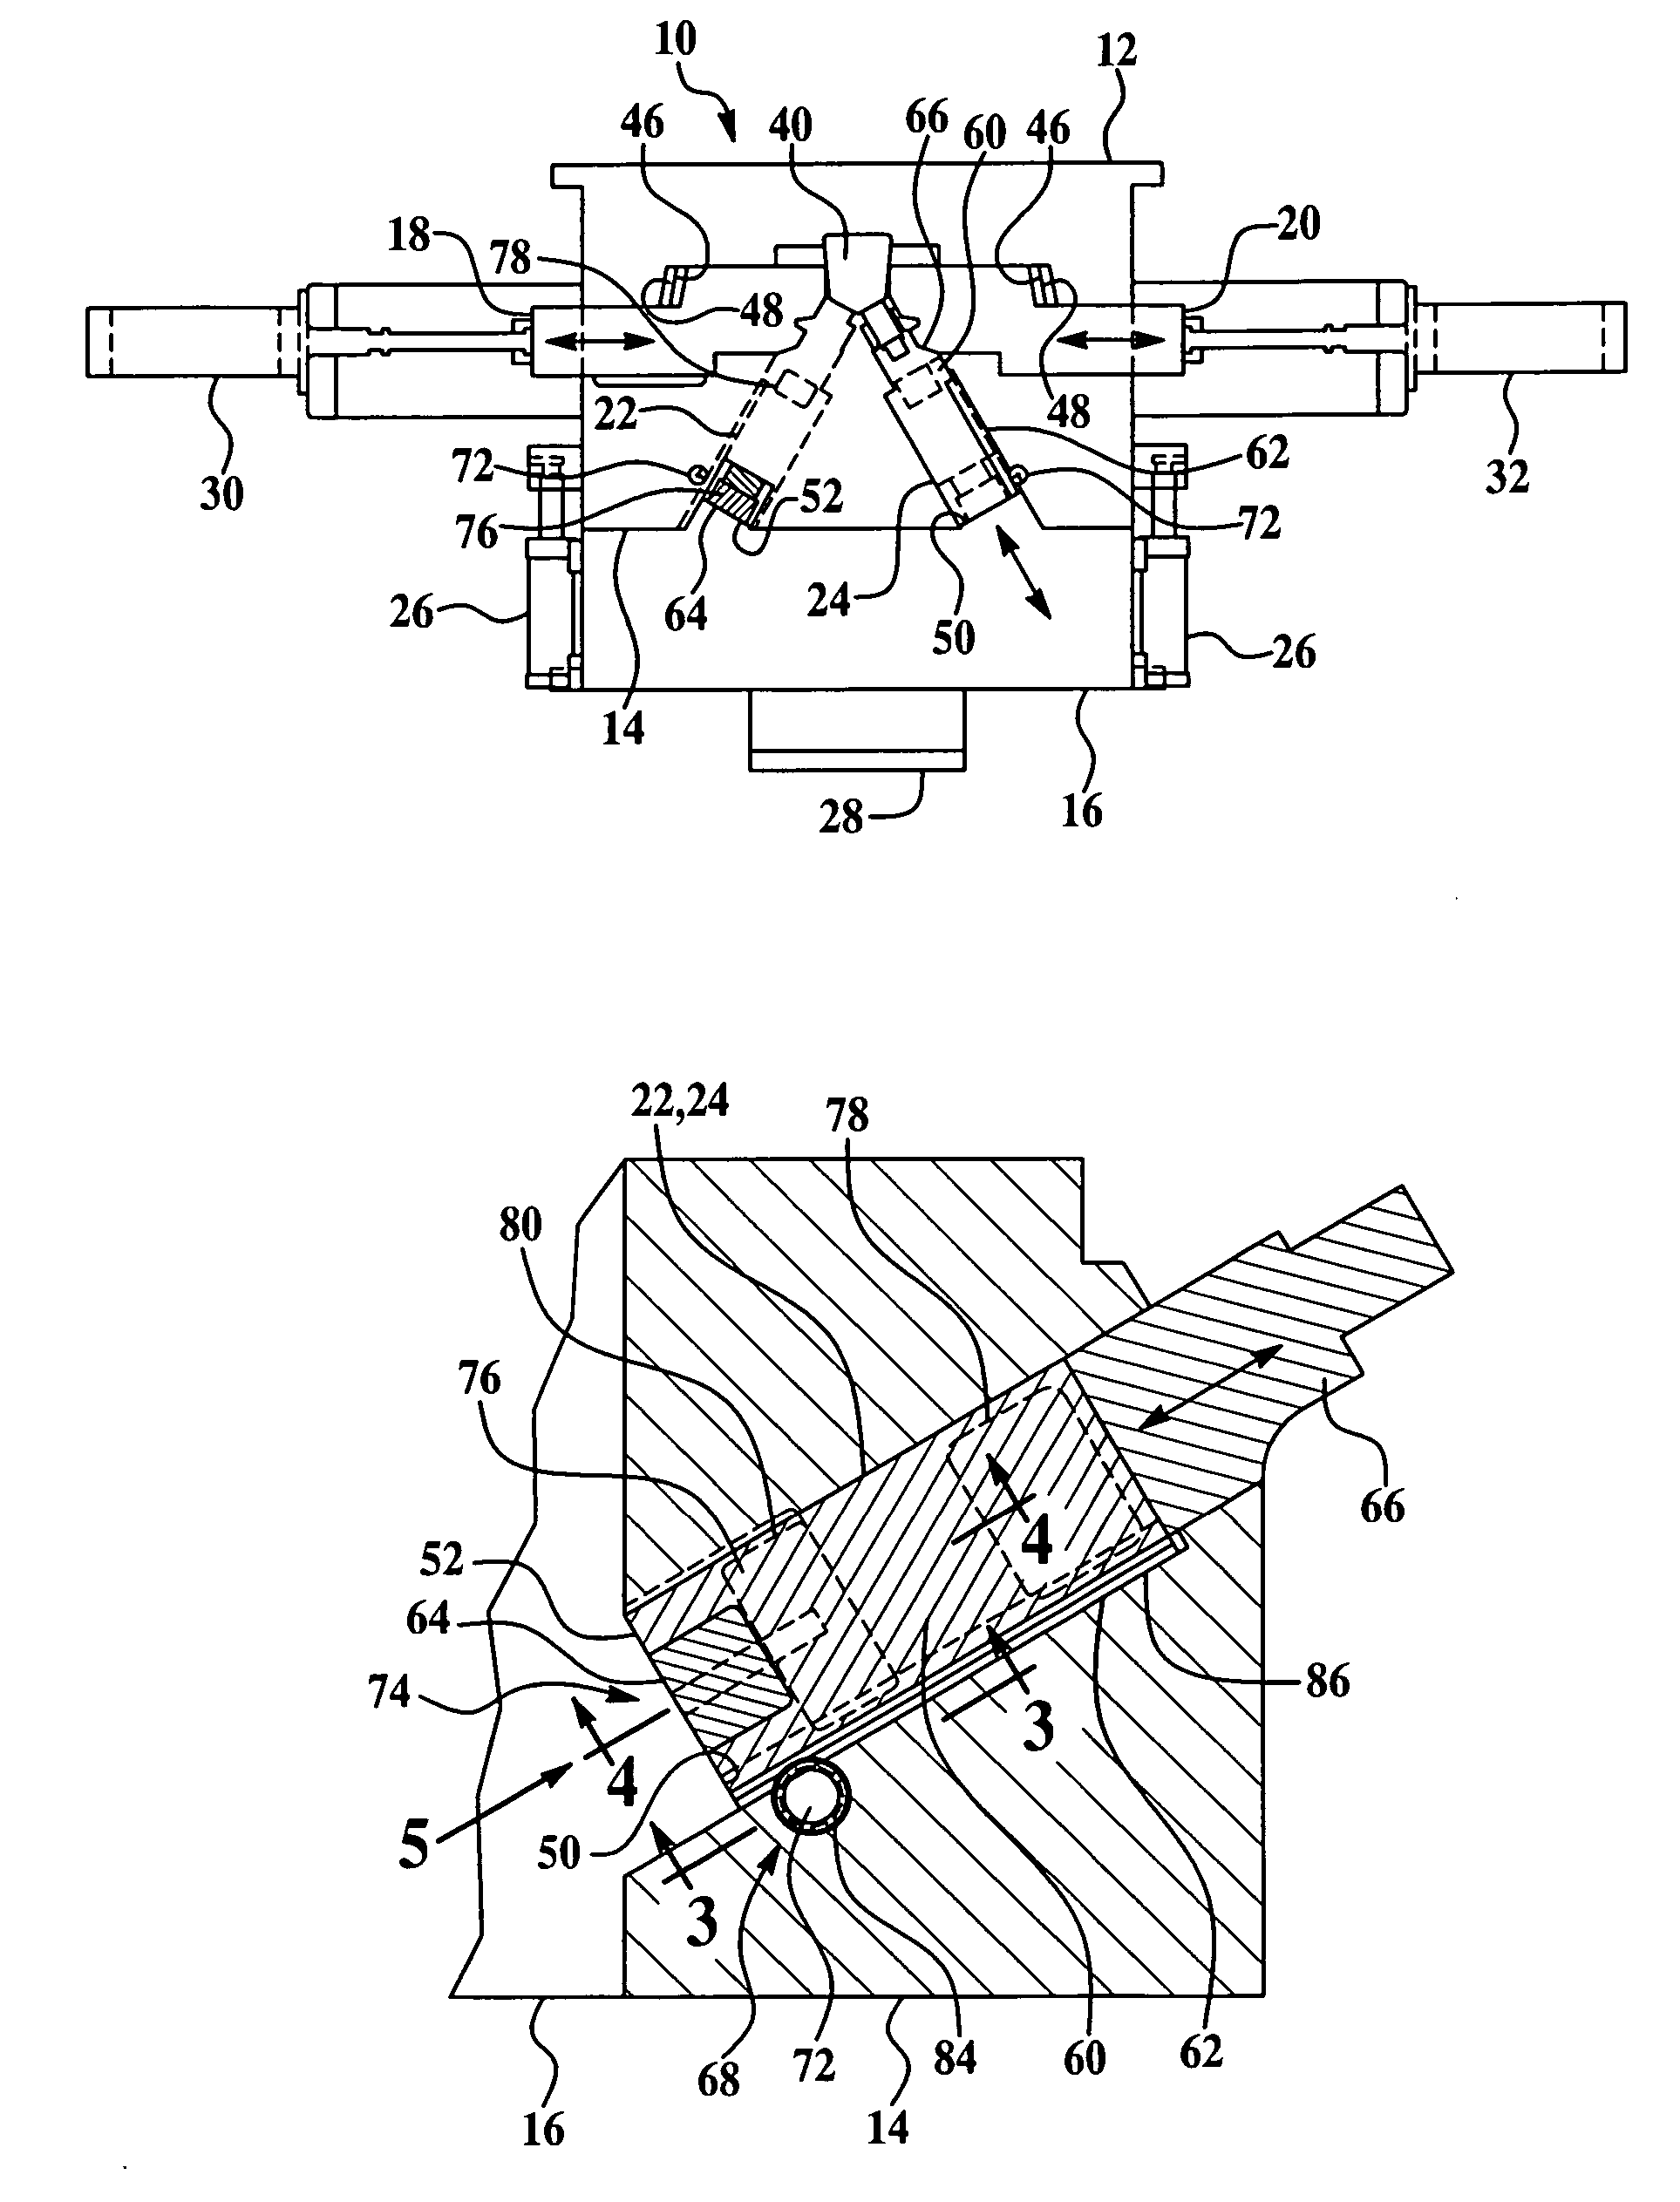 Engine block die-casting apparatus having mechanically actuated bank core slides